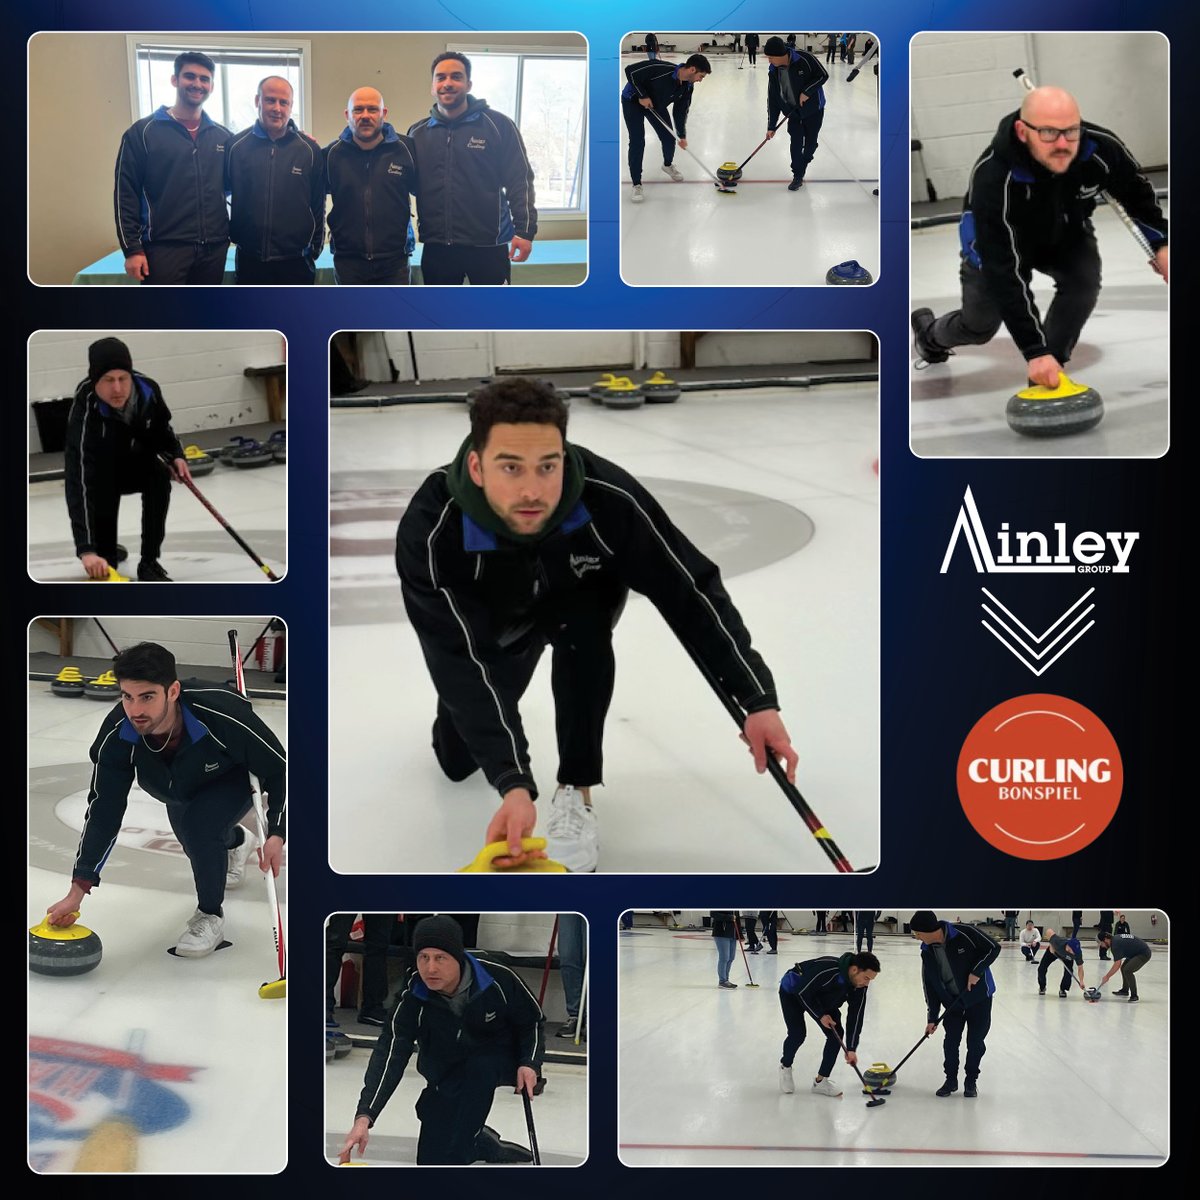 Our Barrie team enjoyed the OACETT Georgian Bay curling bonspiel! It was great connecting with fellow technologists & showcasing our spirit.  Can't wait for next year and hope to see even more of our colleagues joining the fun! #OACETT #Curling #Engineering #Networking #Barrie